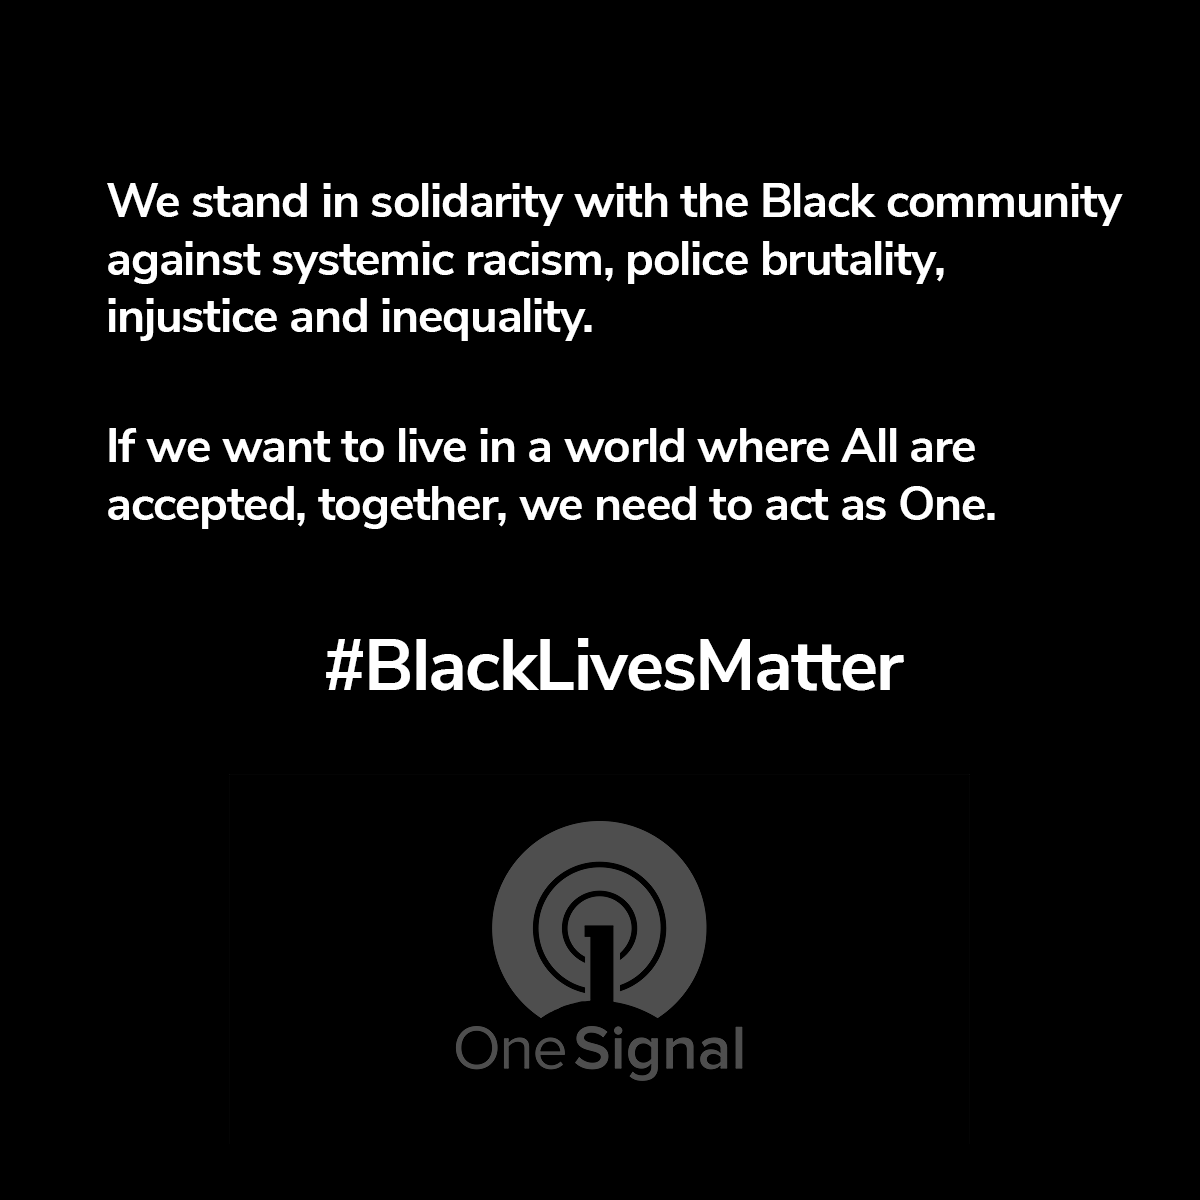 (Image with Text) We stand in solidarity with the Black community against systemic racism, police brutality, injustice and inequality. . If we want to live in a world where All are accepted, together, we need to act as One. #BlackLivesMatter